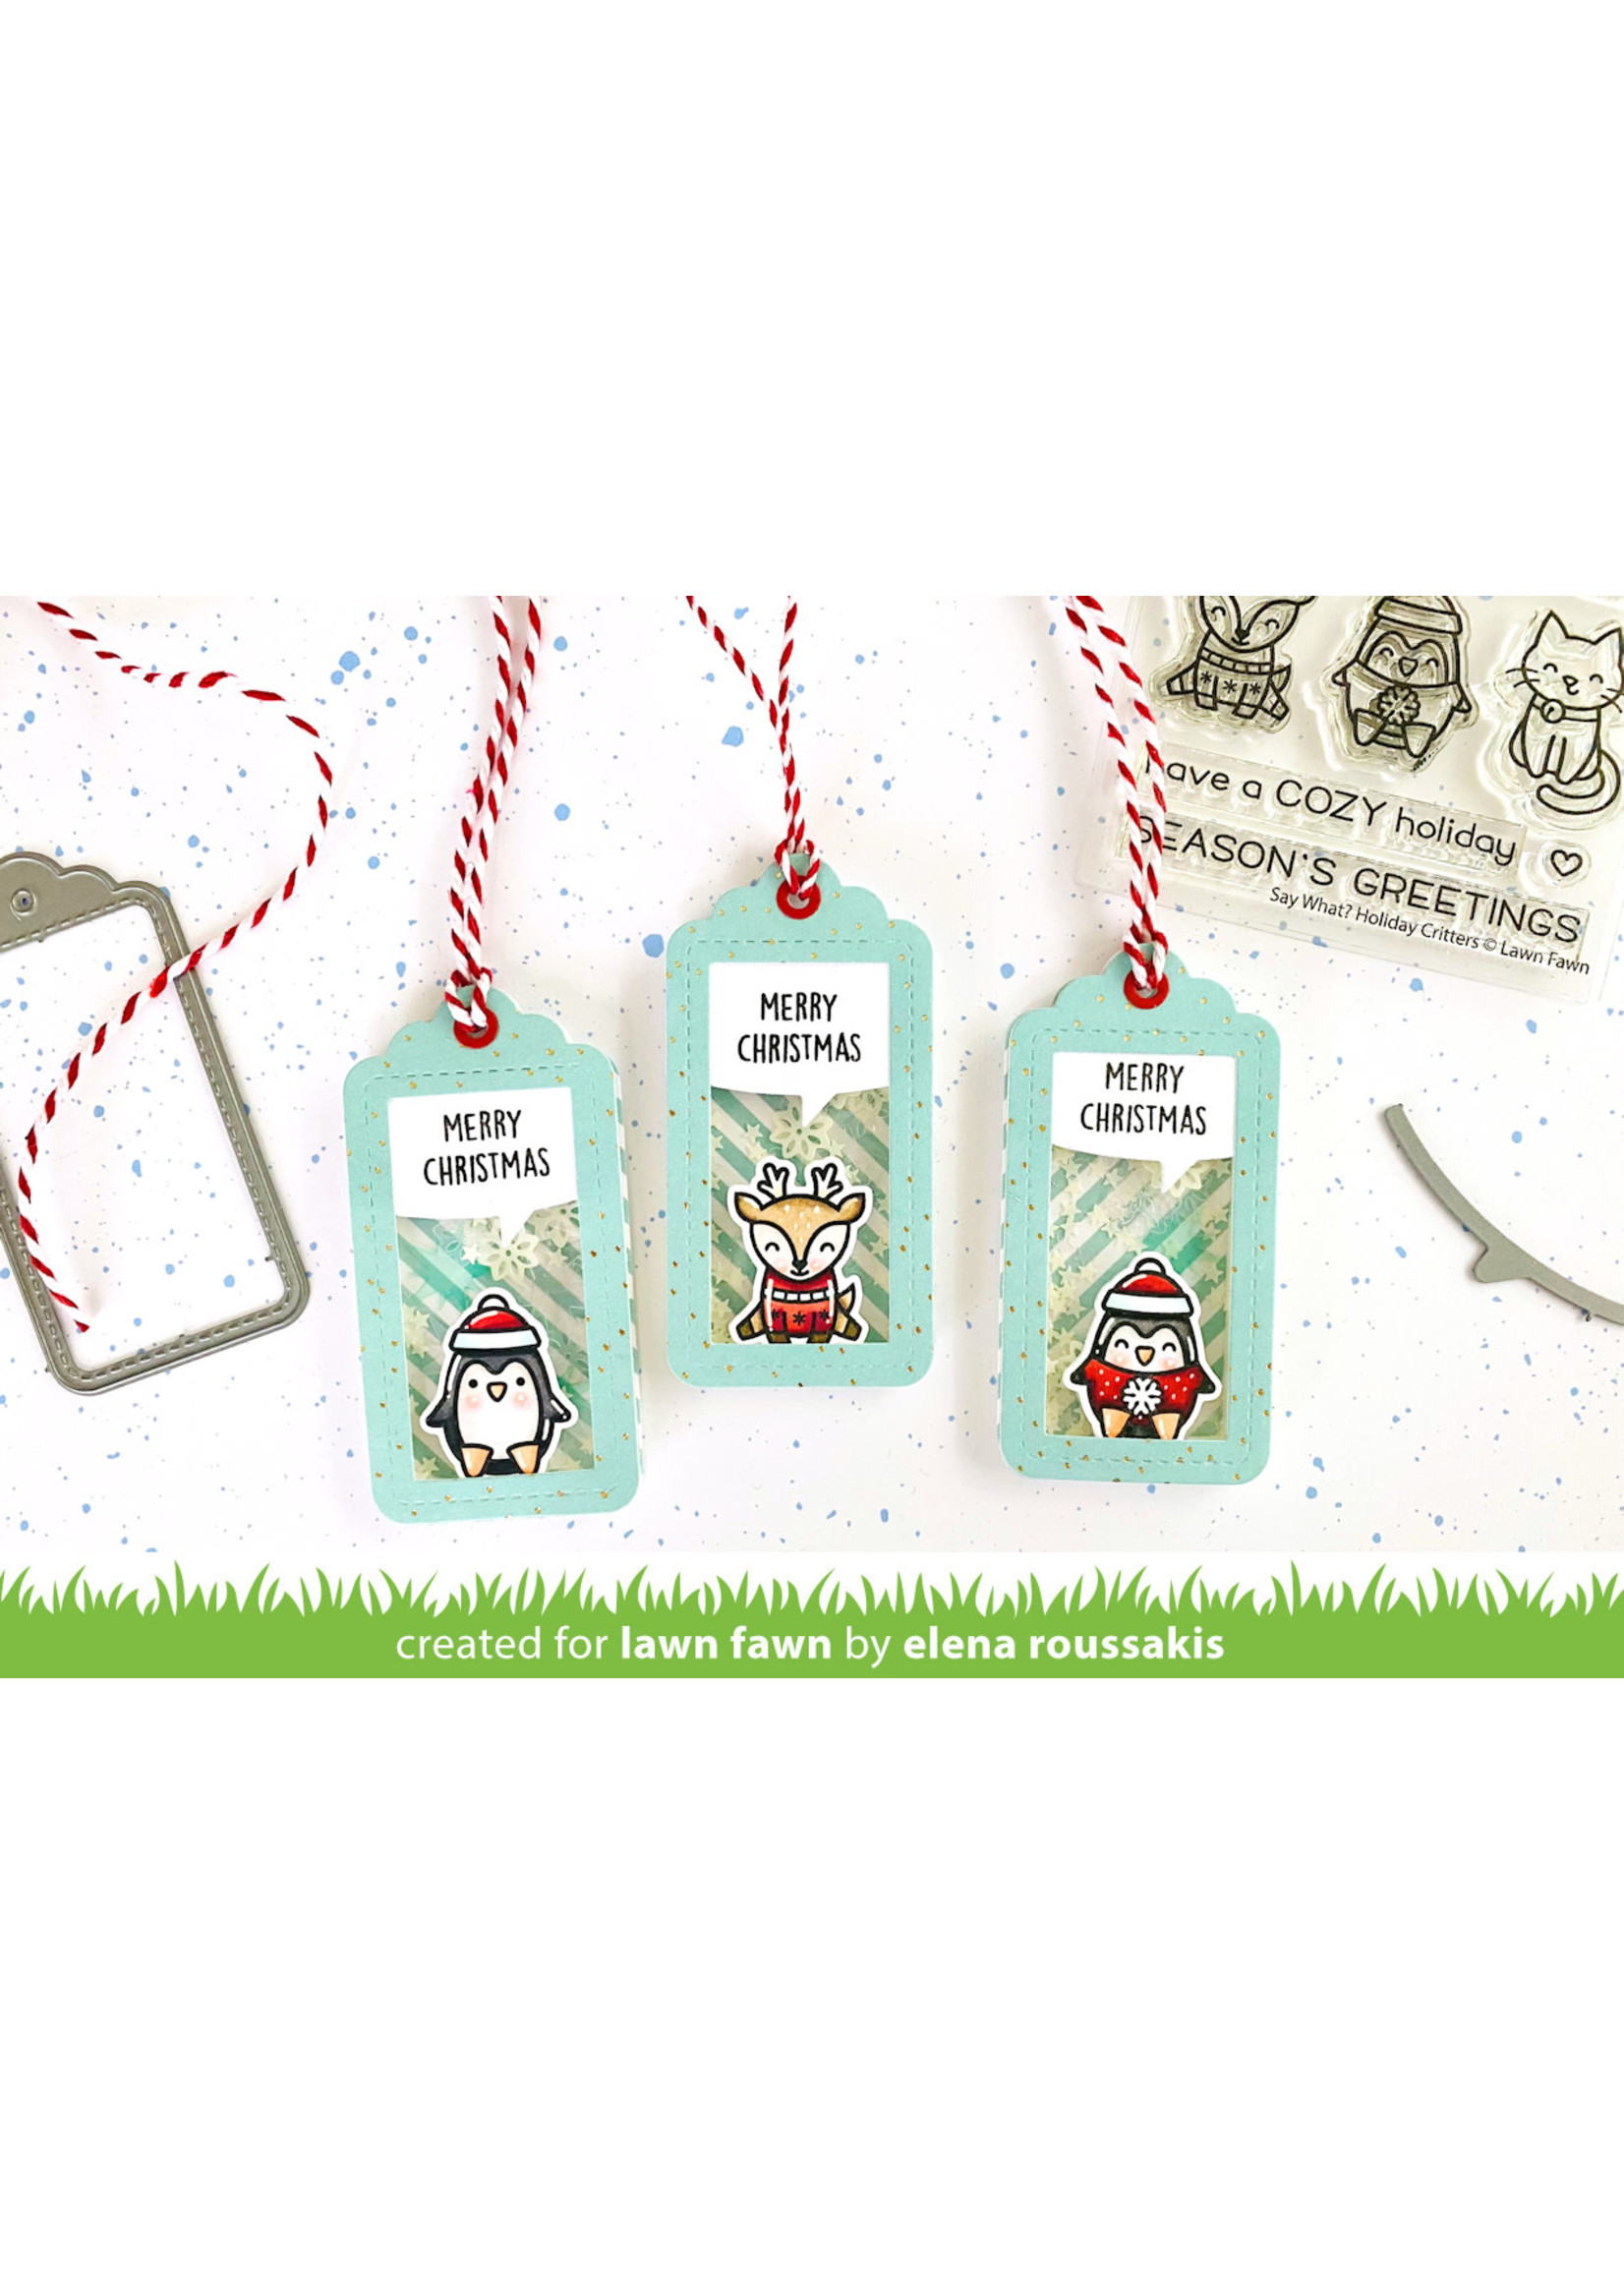 Lawn Fawn say what? holiday critters stamp